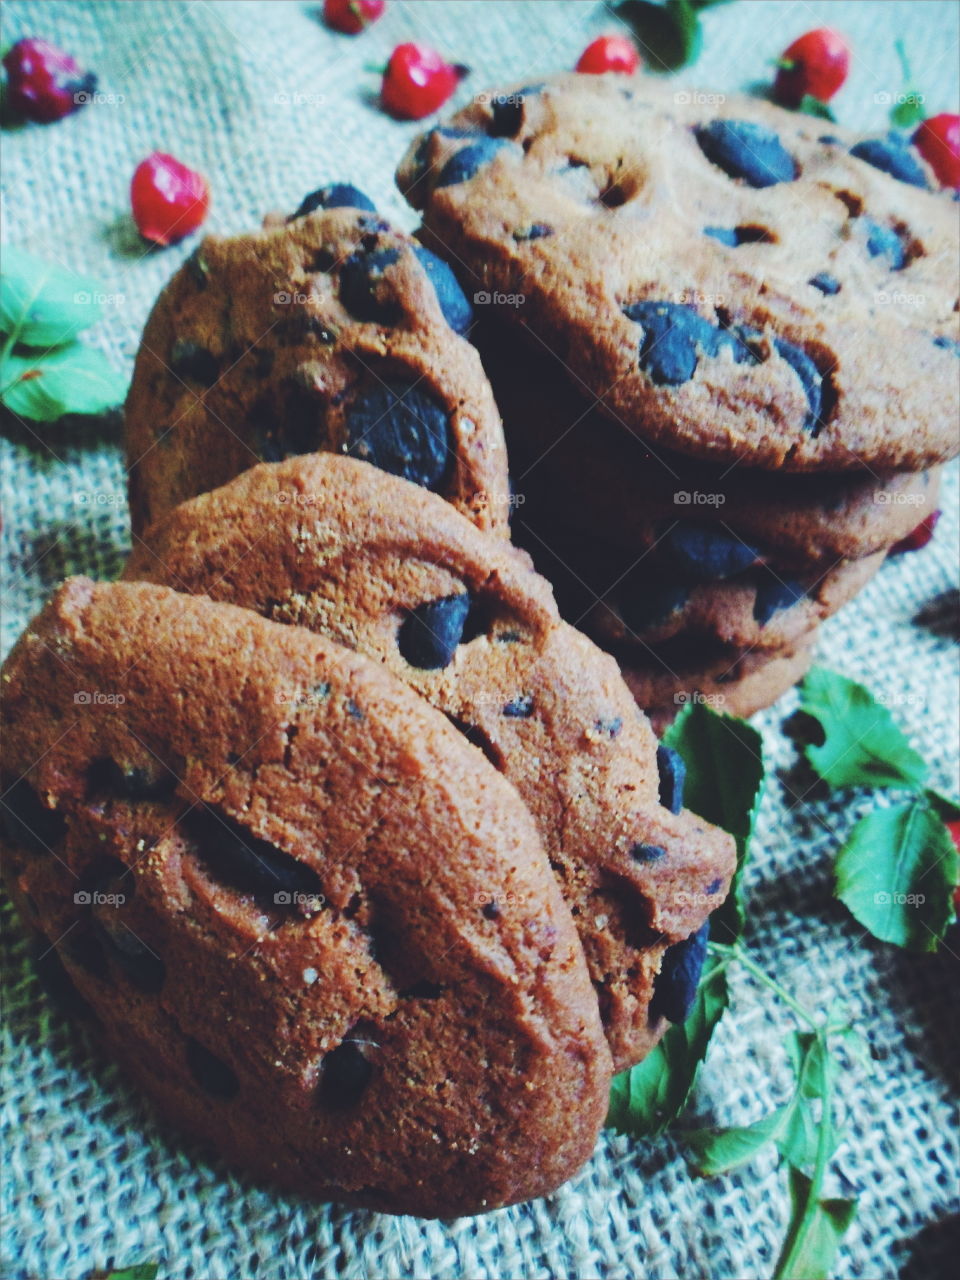 oatmeal cookies with chunks of chocolate and rose hips, dessert